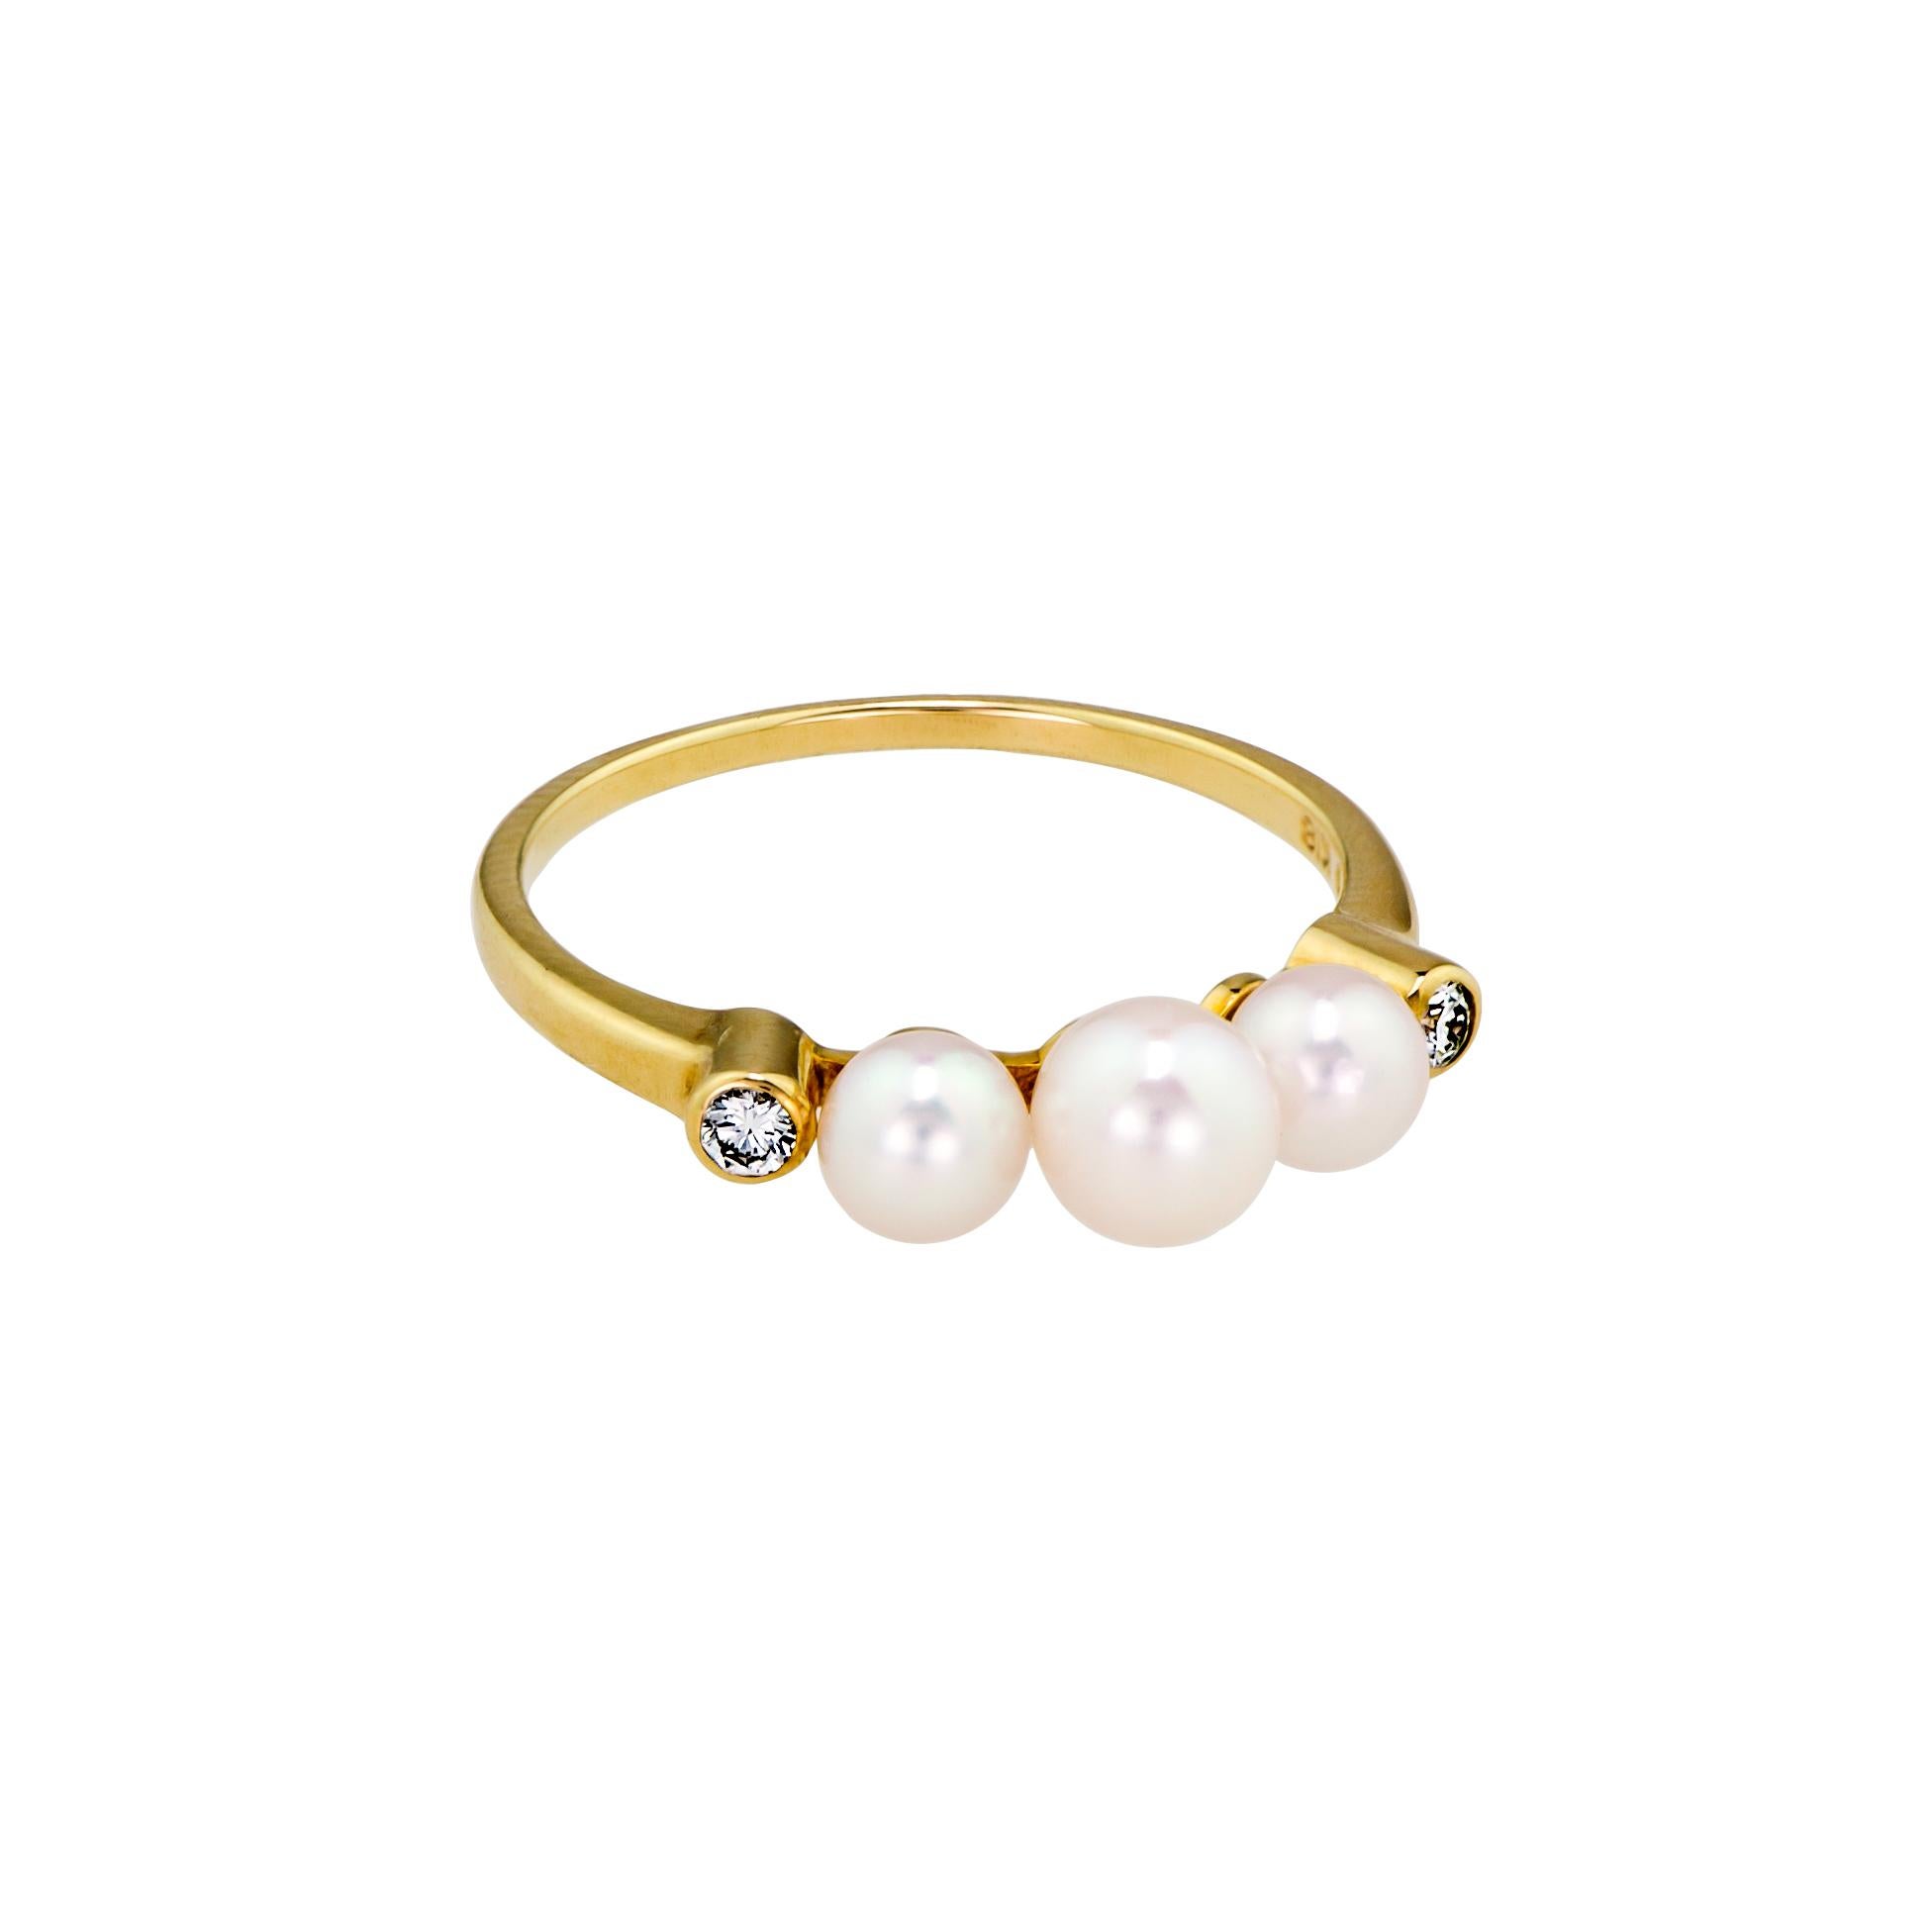 Sweet Vintage Mikimoto cultured pearl diamond and 18kt yellow gold ring - 3 fine cultured pearls - center 5mm two sides 4mm - two small round brilliant cut natural diamonds bezel set - 18kt yellow gold mount - hallmarked in shank- Excellent